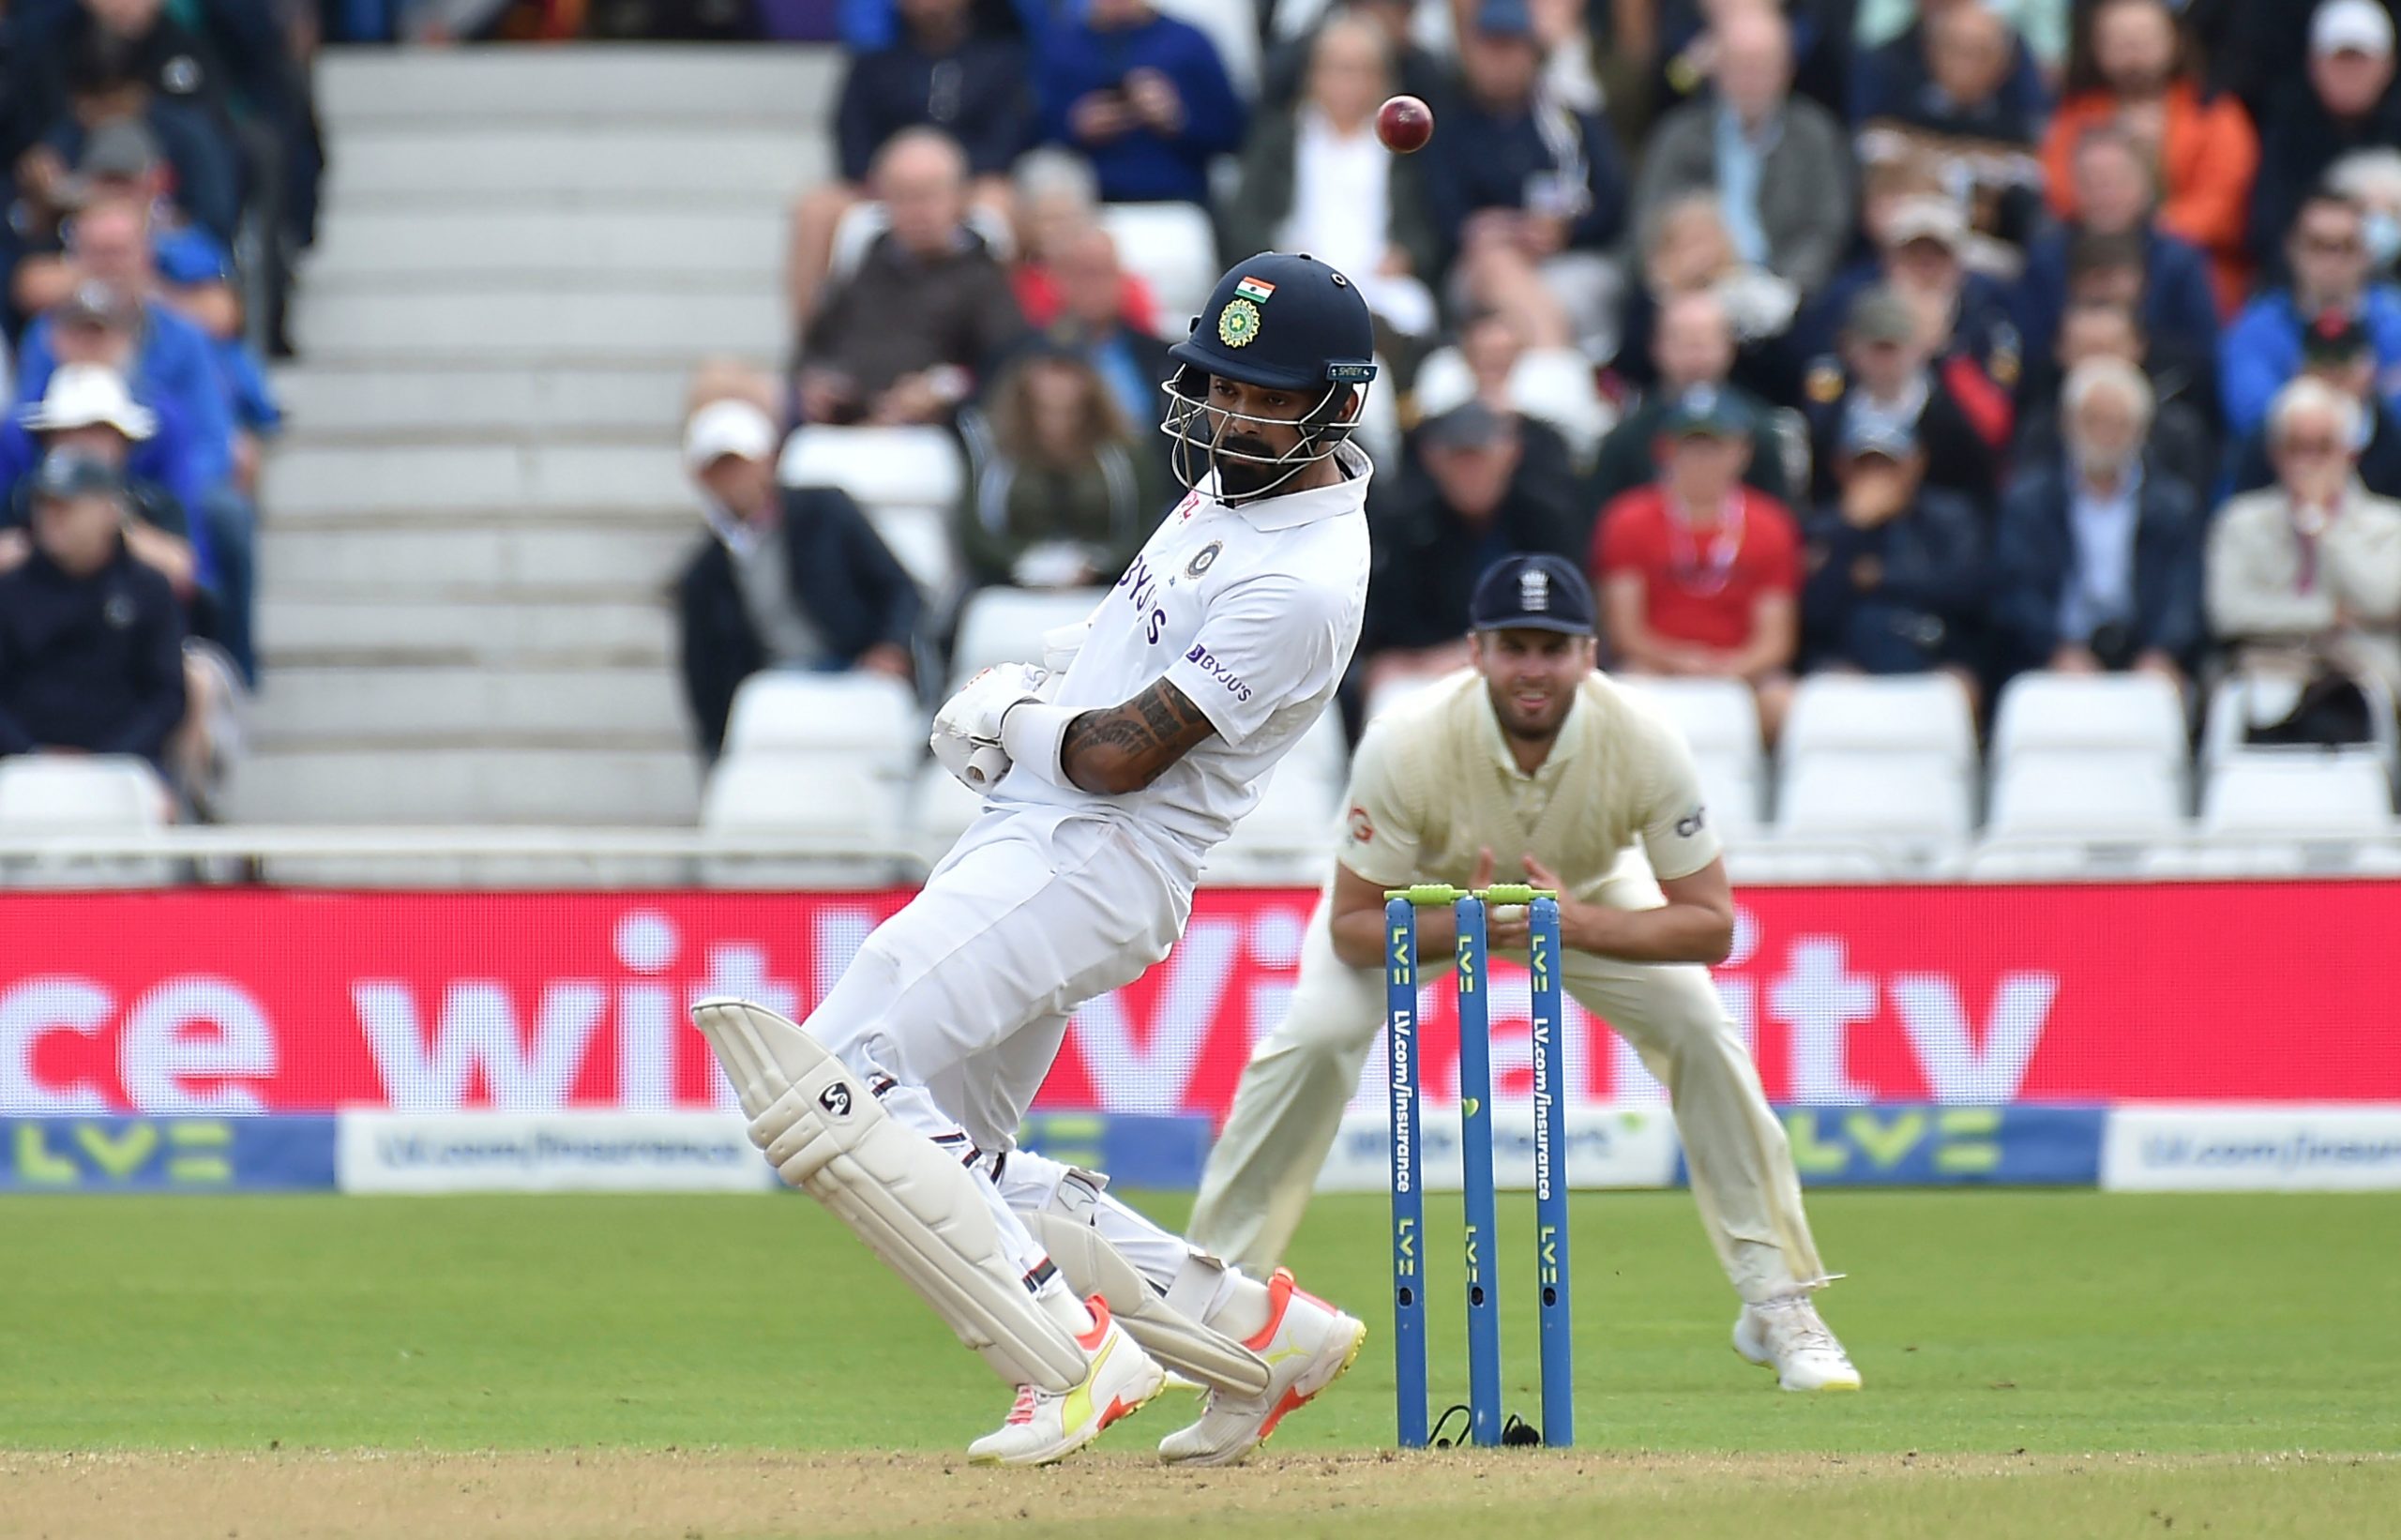 After scoring 84, KL Rahul says learnt from 2018 England tour